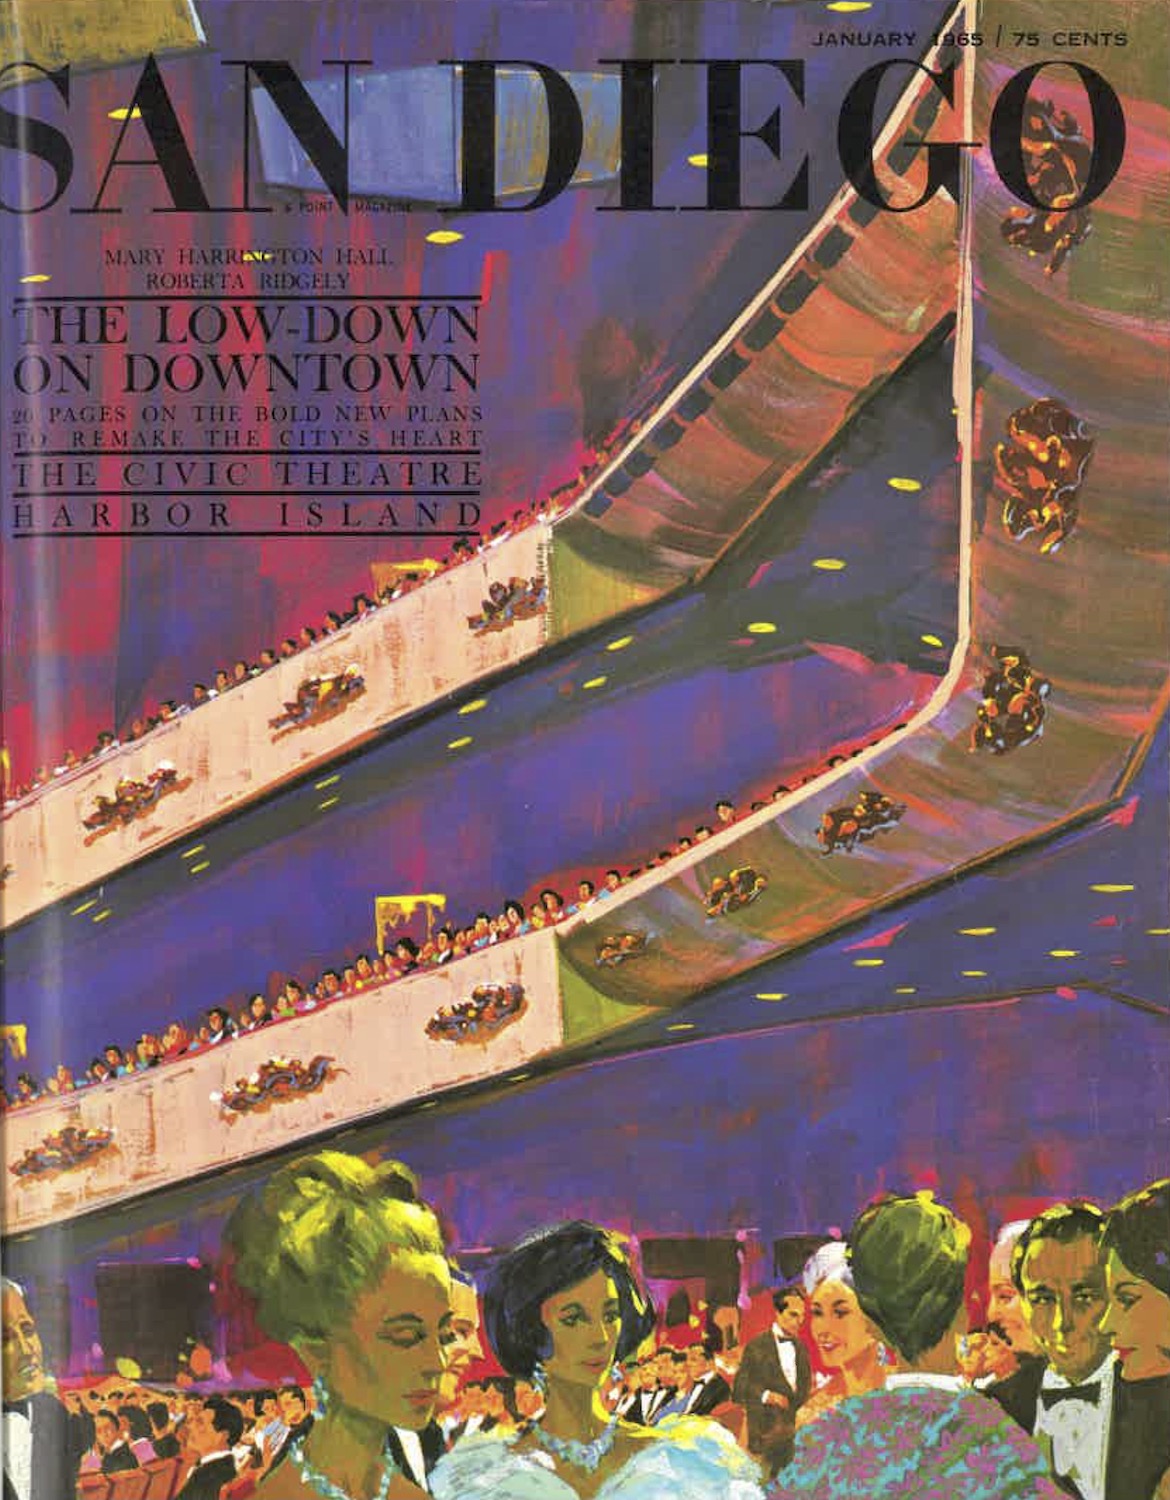 San Diego Magazine January 1965 cover illustrated by illustration by artist D. Wayne “Bunky” Millsap